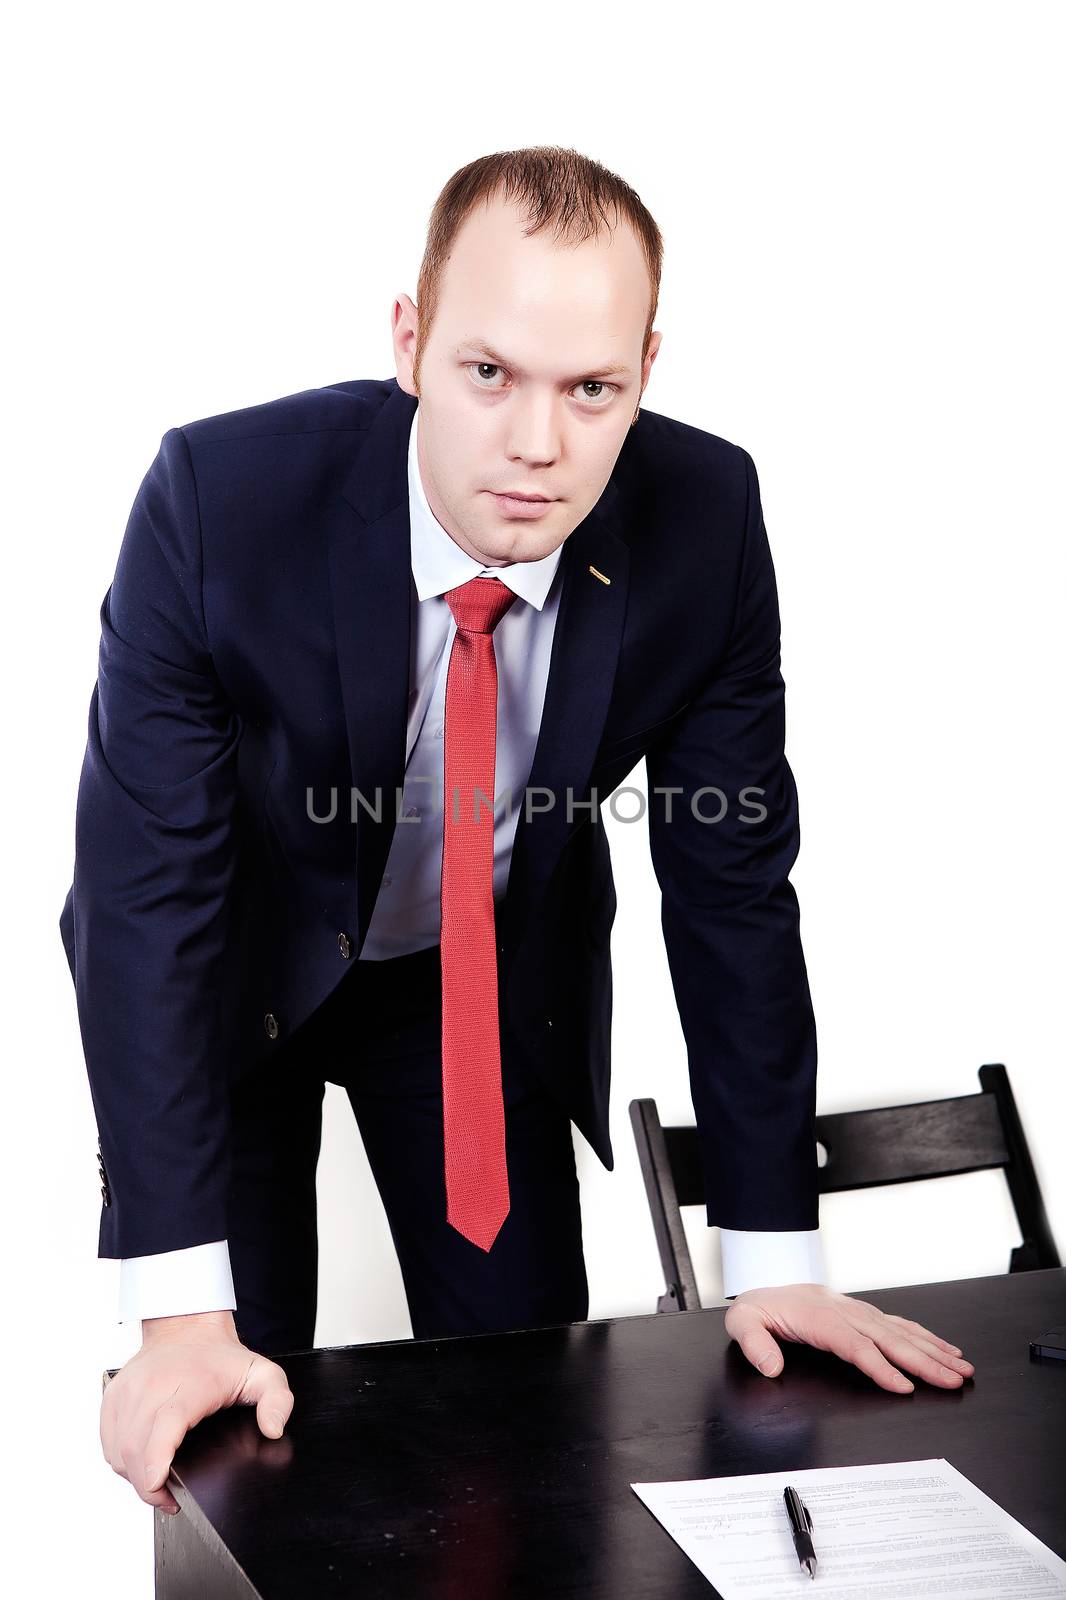 Director with a red tie leaned on the table with both hands on an isolated white background.